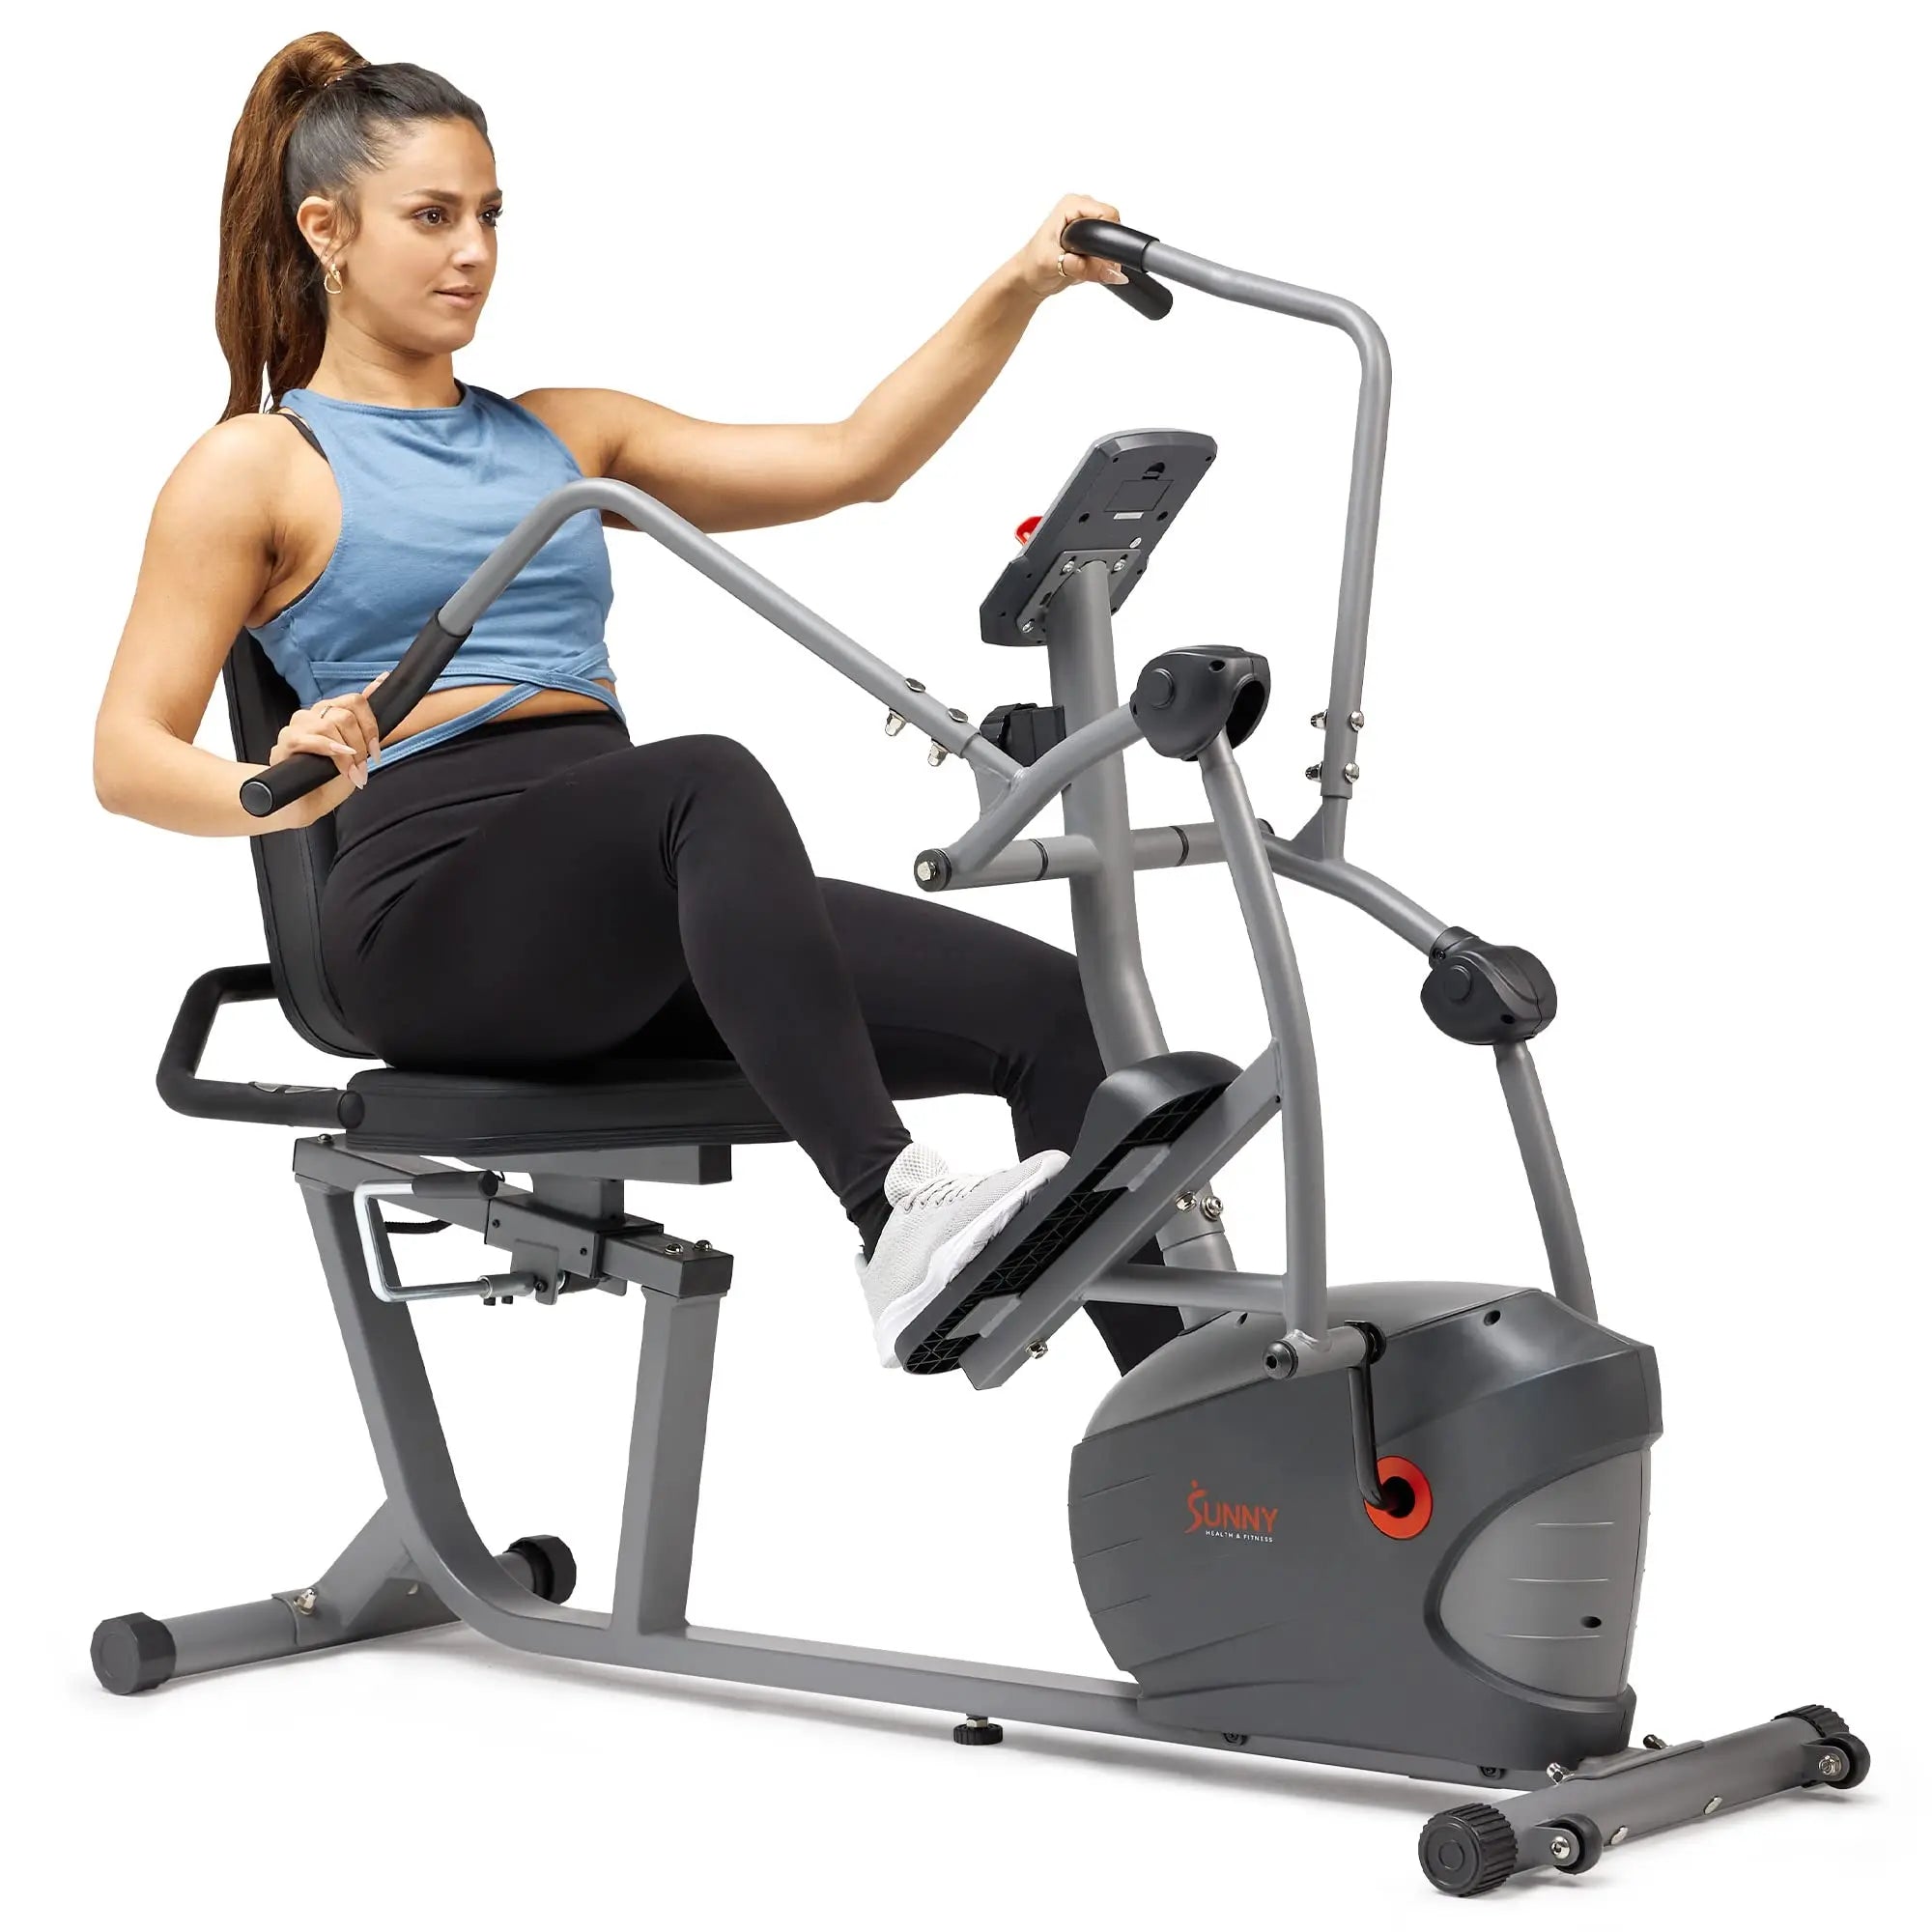 Compact Performance Recumbent Bike with Dual Motion Arm Exercisers